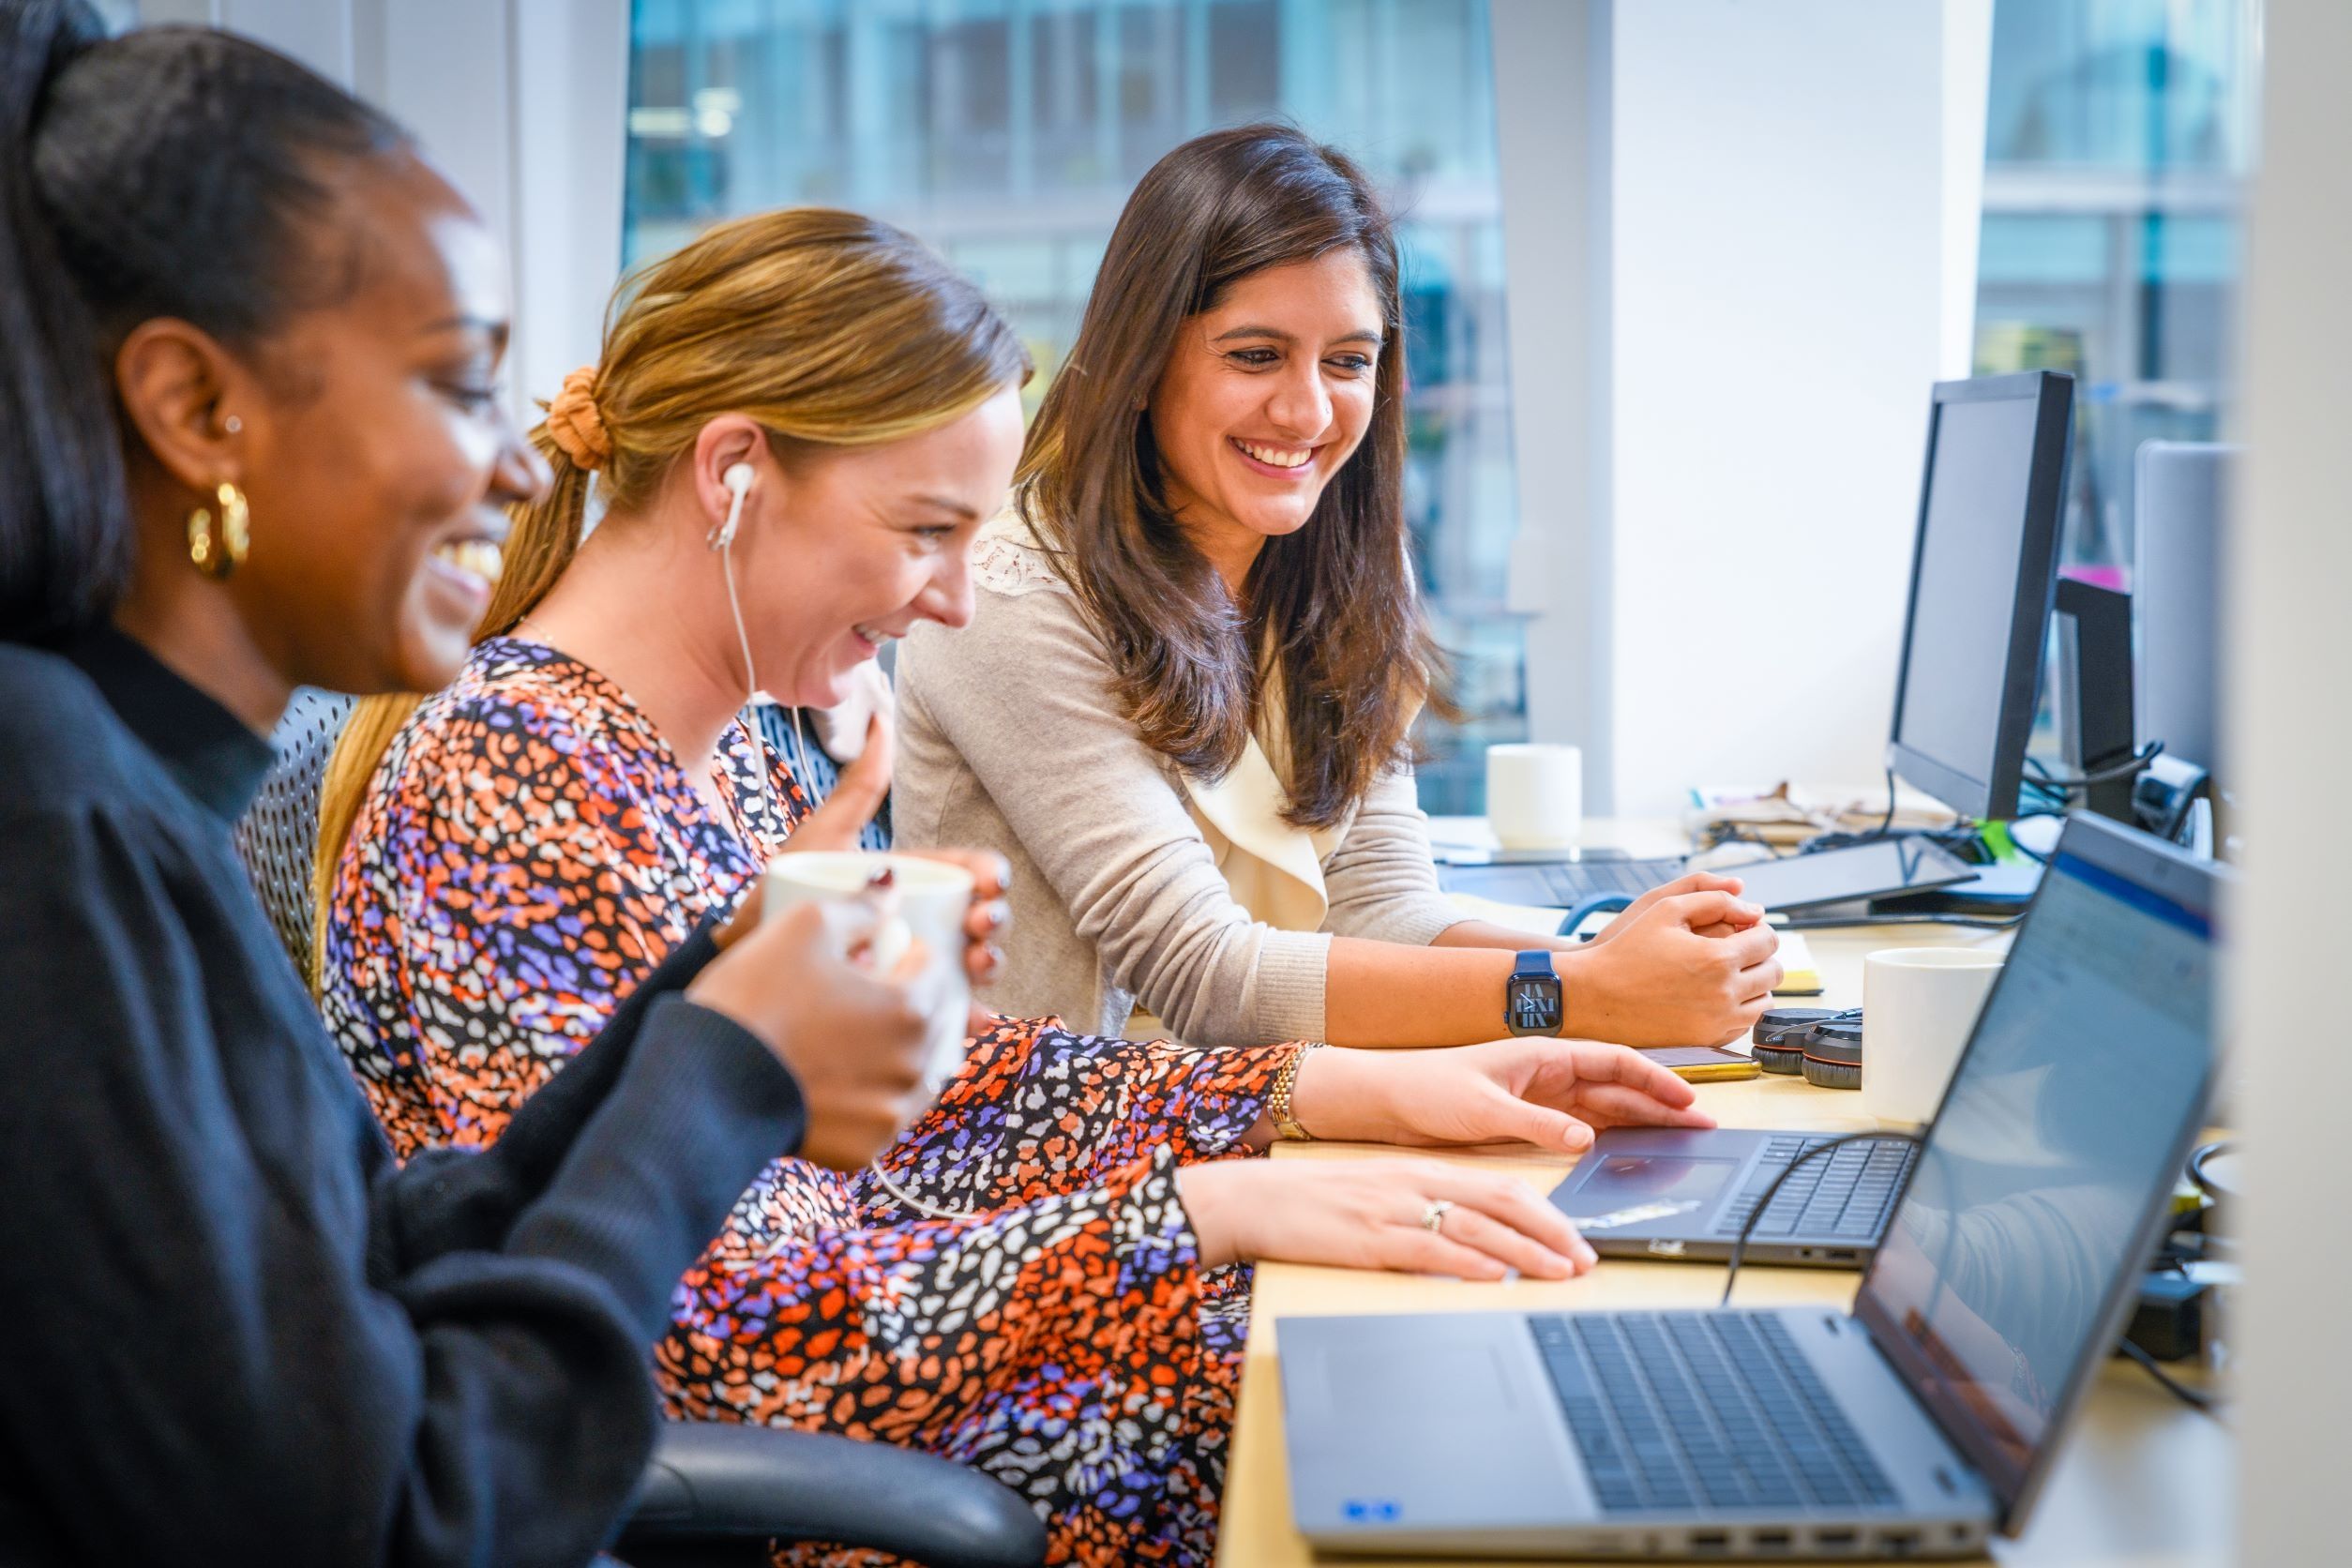 three women sitting at a desk smiling while they work on their laptops